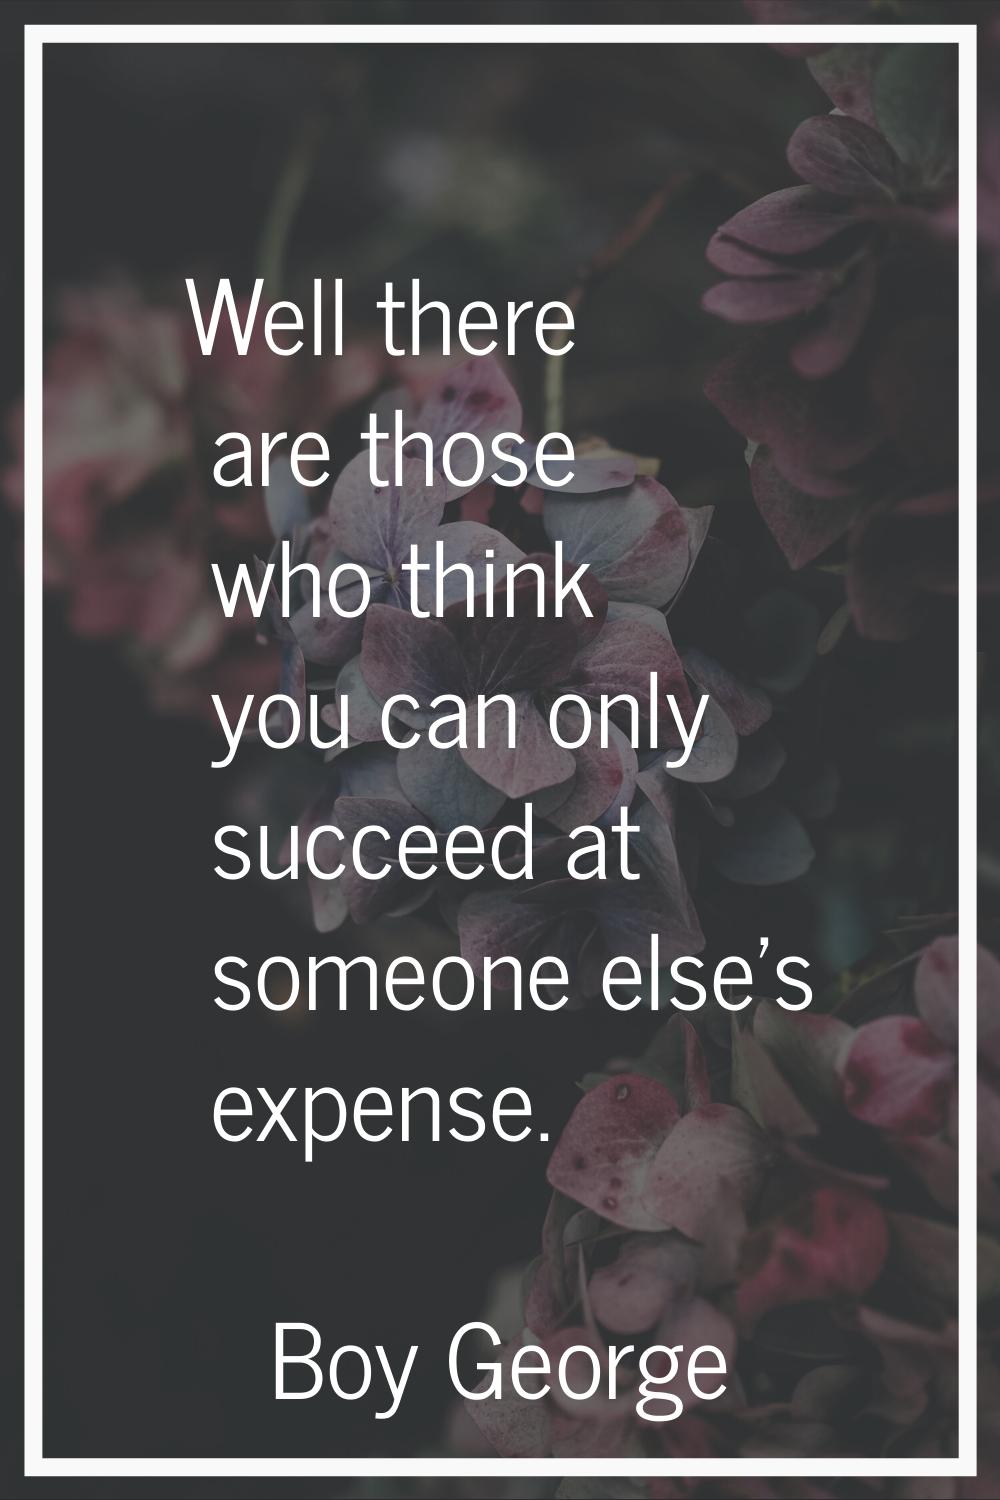 Well there are those who think you can only succeed at someone else's expense.